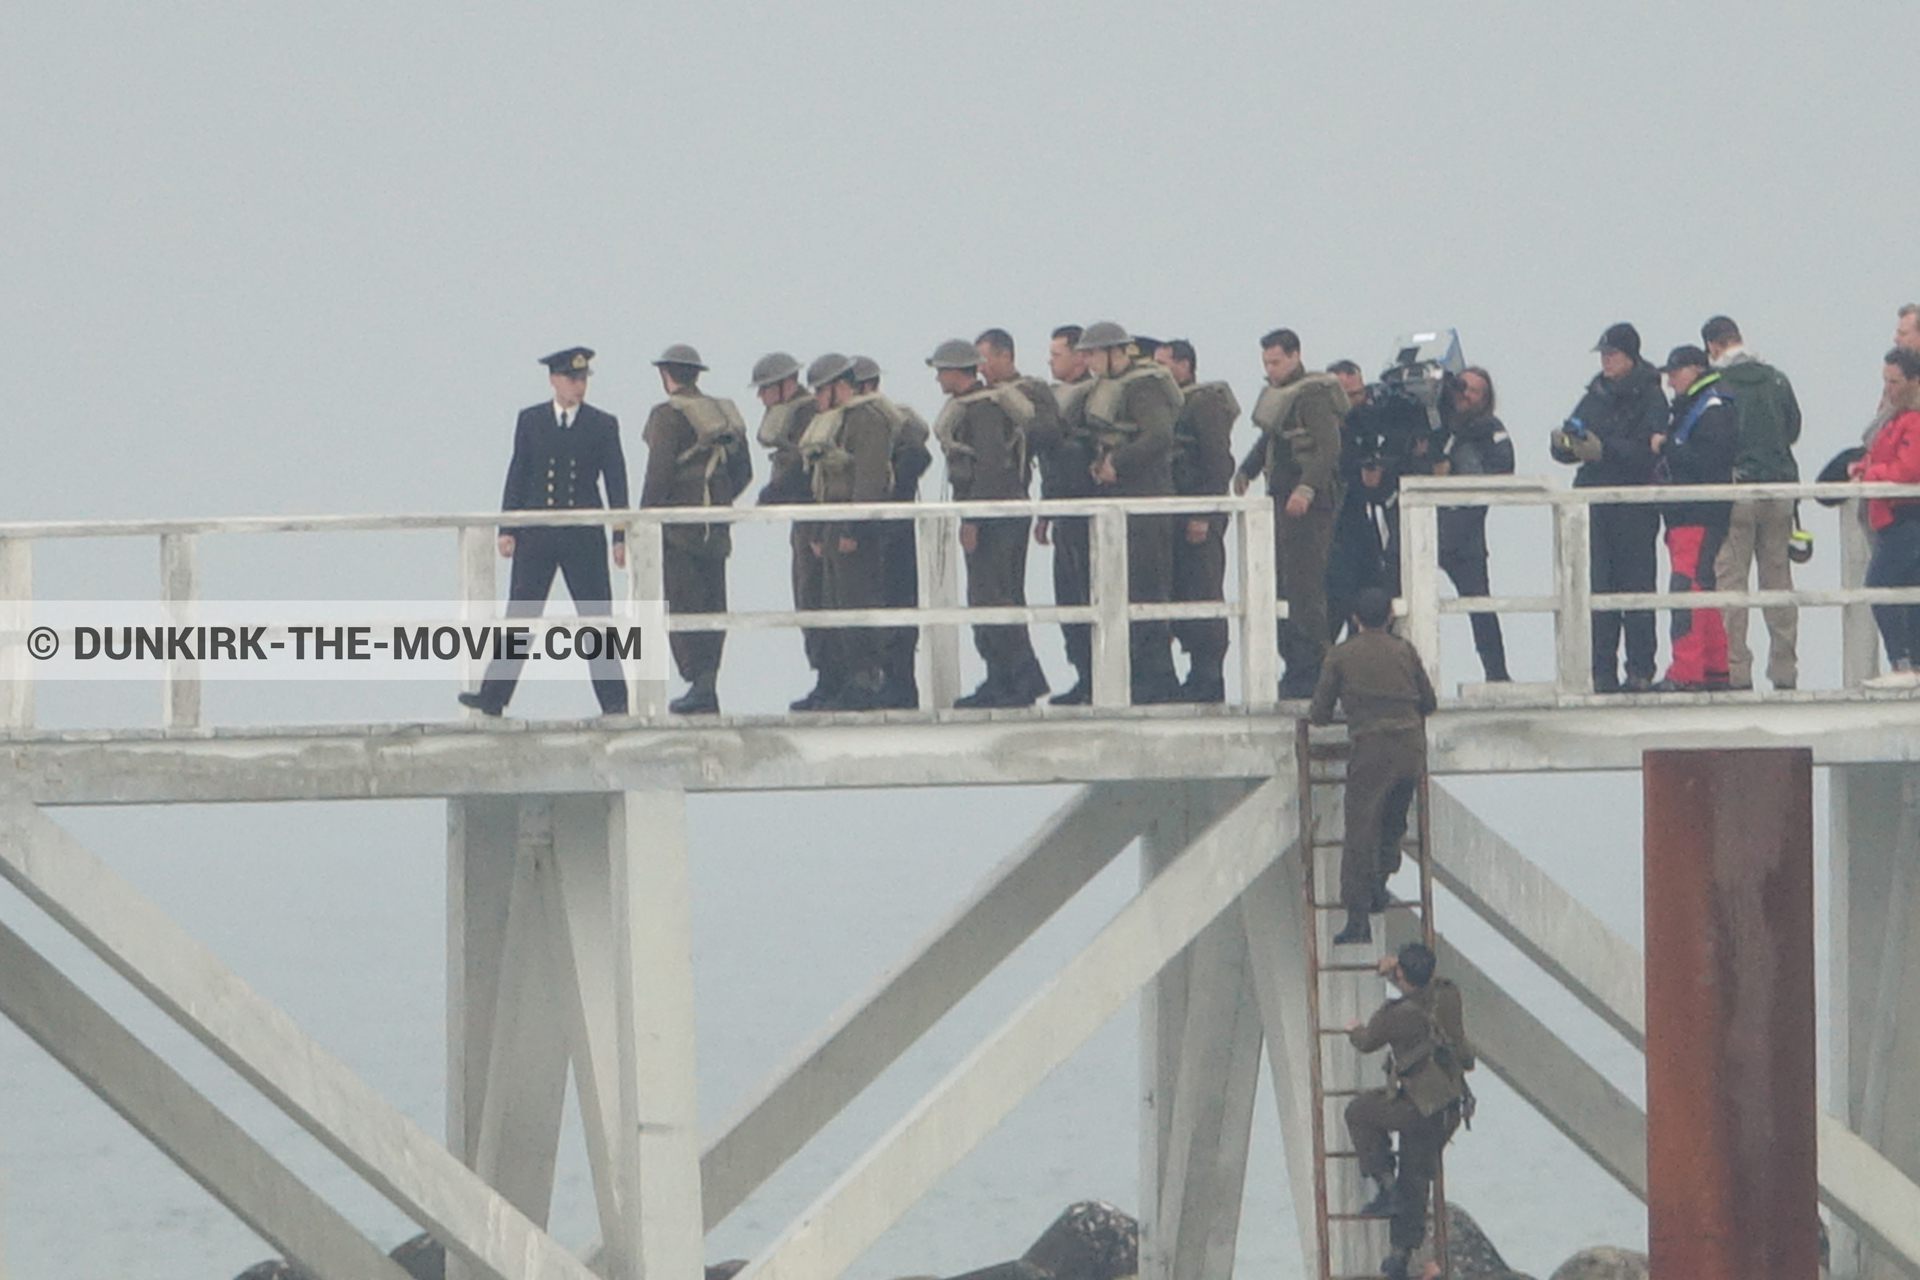 Picture with actor, IMAX camera, grey sky, supernumeraries, Hoyte van Hoytema, EST pier,  from behind the scene of the Dunkirk movie by Nolan